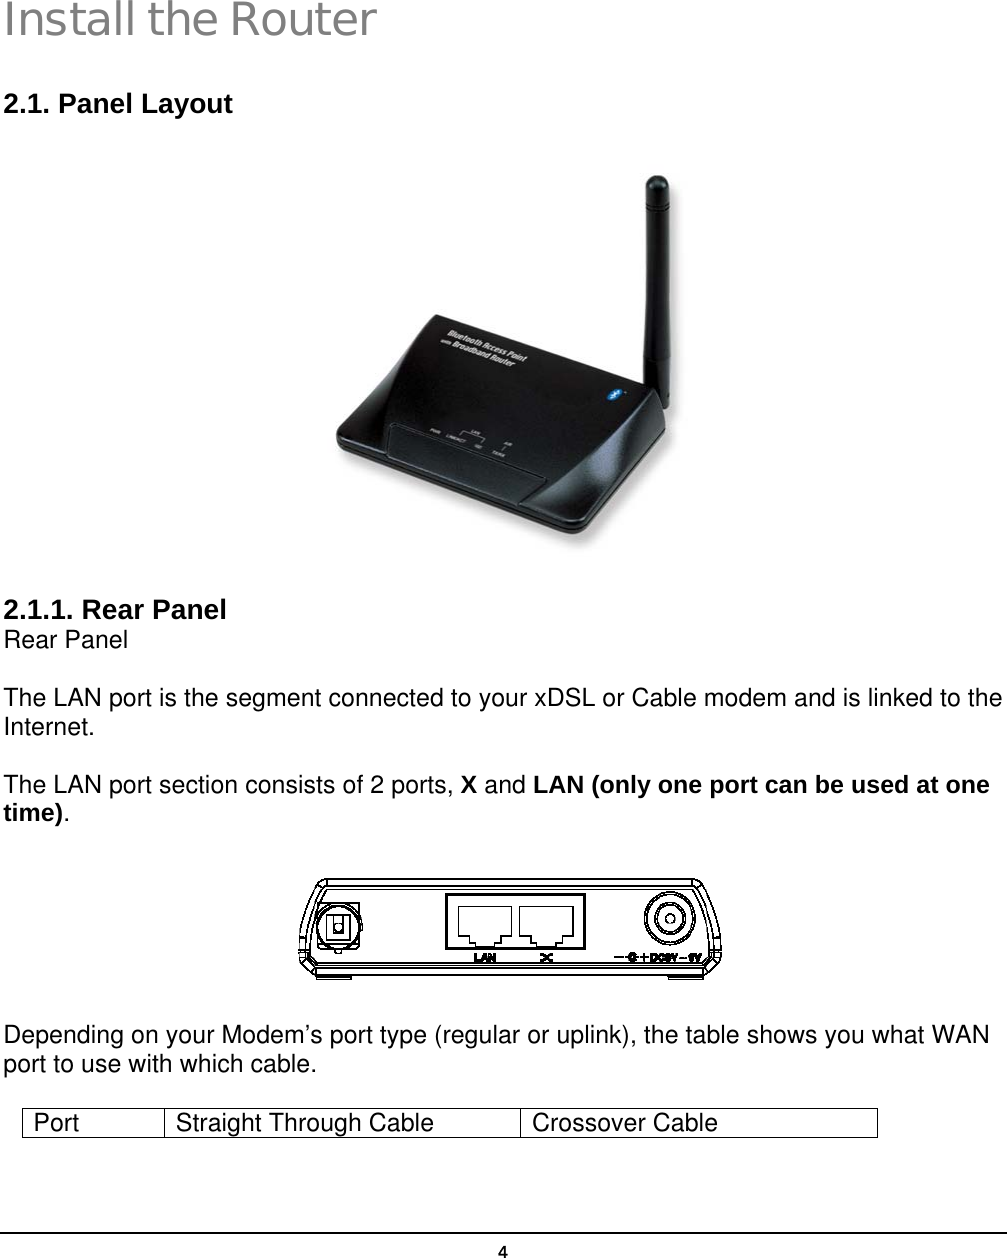   4Install the Router 2.1. Panel Layout  2.1.1. Rear Panel Rear Panel The LAN port is the segment connected to your xDSL or Cable modem and is linked to the Internet. The LAN port section consists of 2 ports, X and LAN (only one port can be used at one time).  Depending on your Modem’s port type (regular or uplink), the table shows you what WAN port to use with which cable. Port Straight Through Cable Crossover Cable  2 